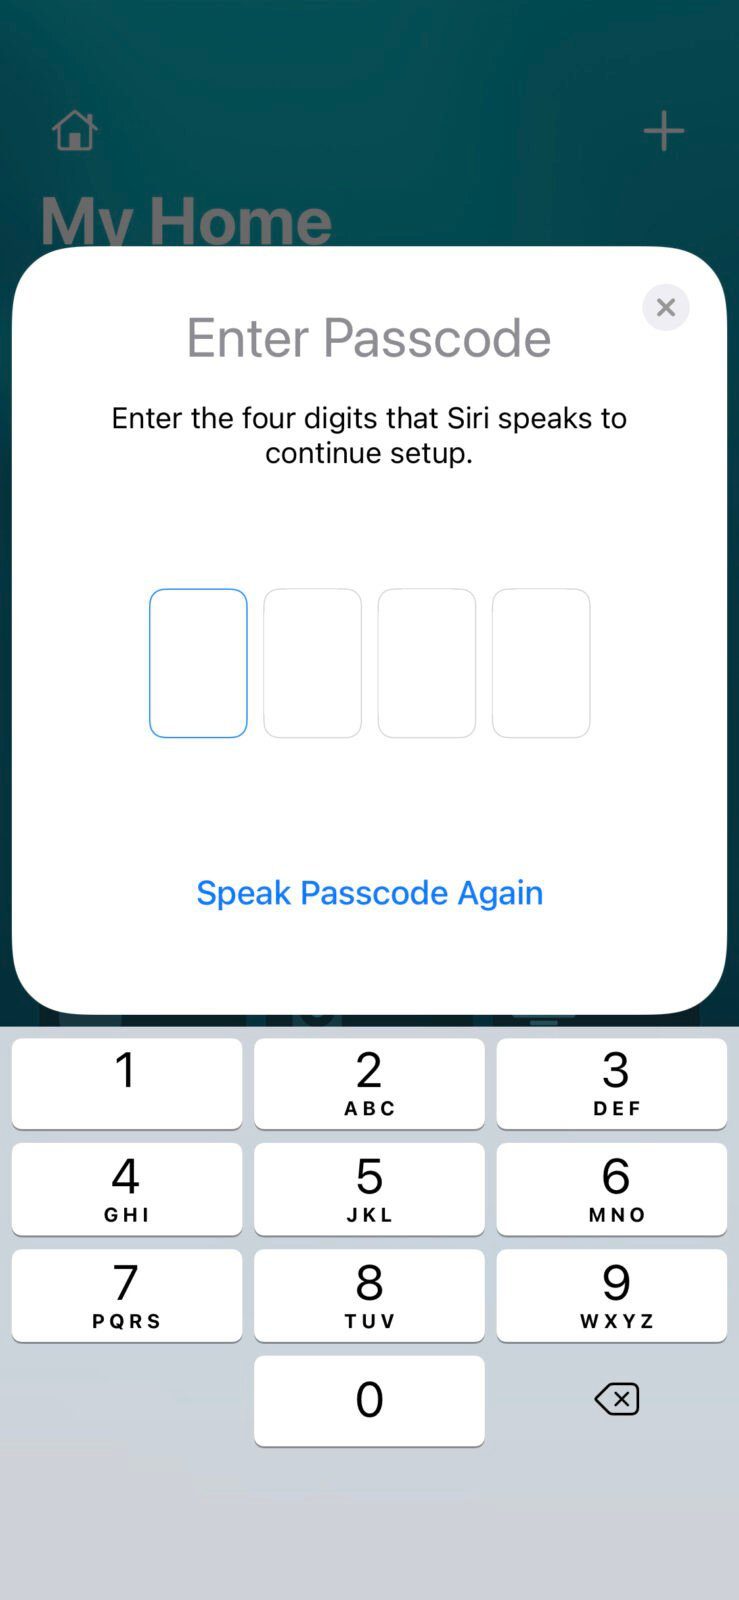 How to Set Up Your HomePod with and iPhone